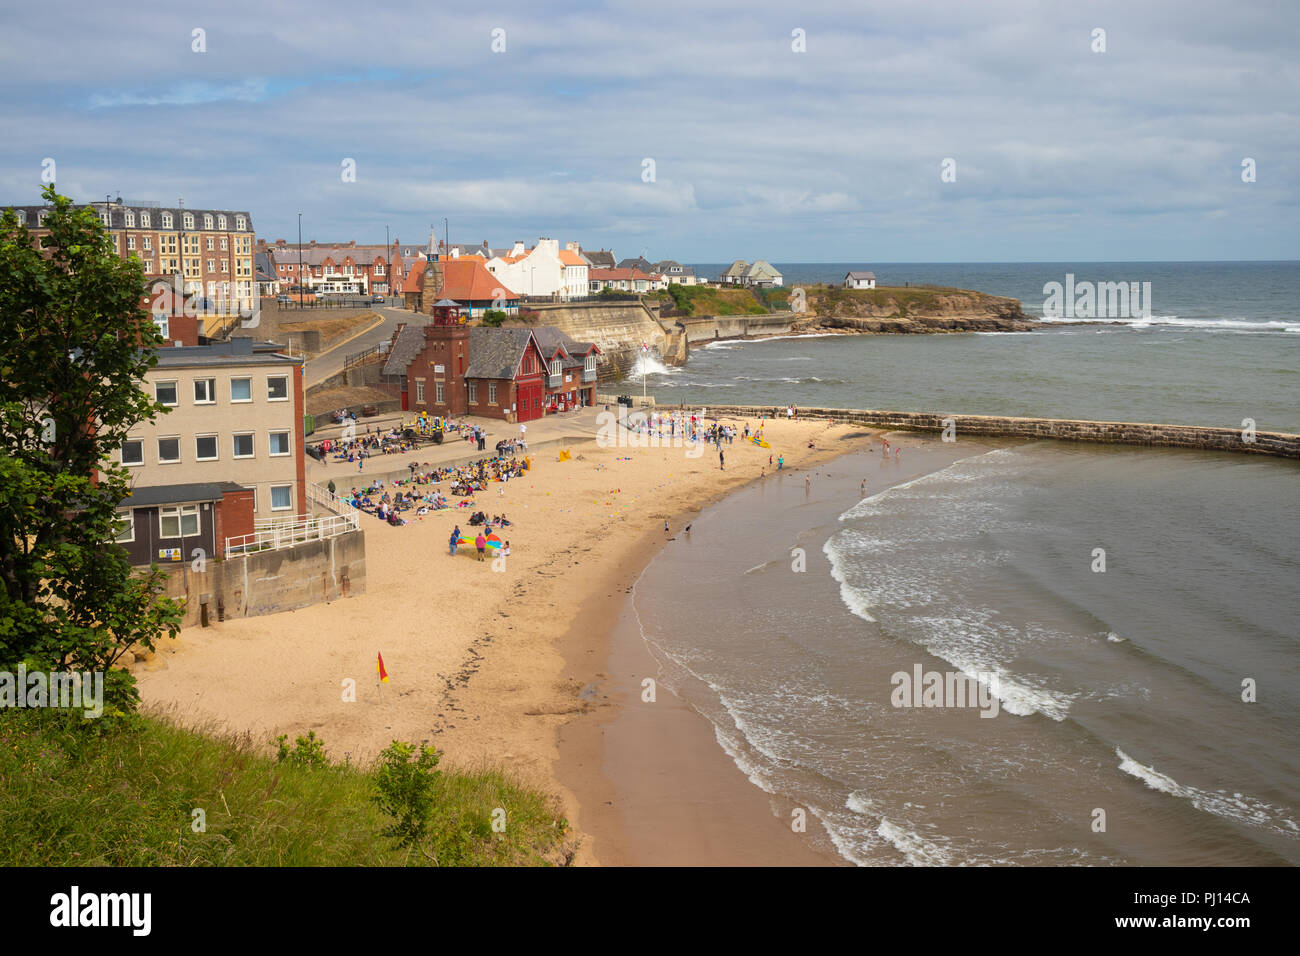 The picturesque Cullercoats Bay, North Tyneside, England, UK Stock Photo